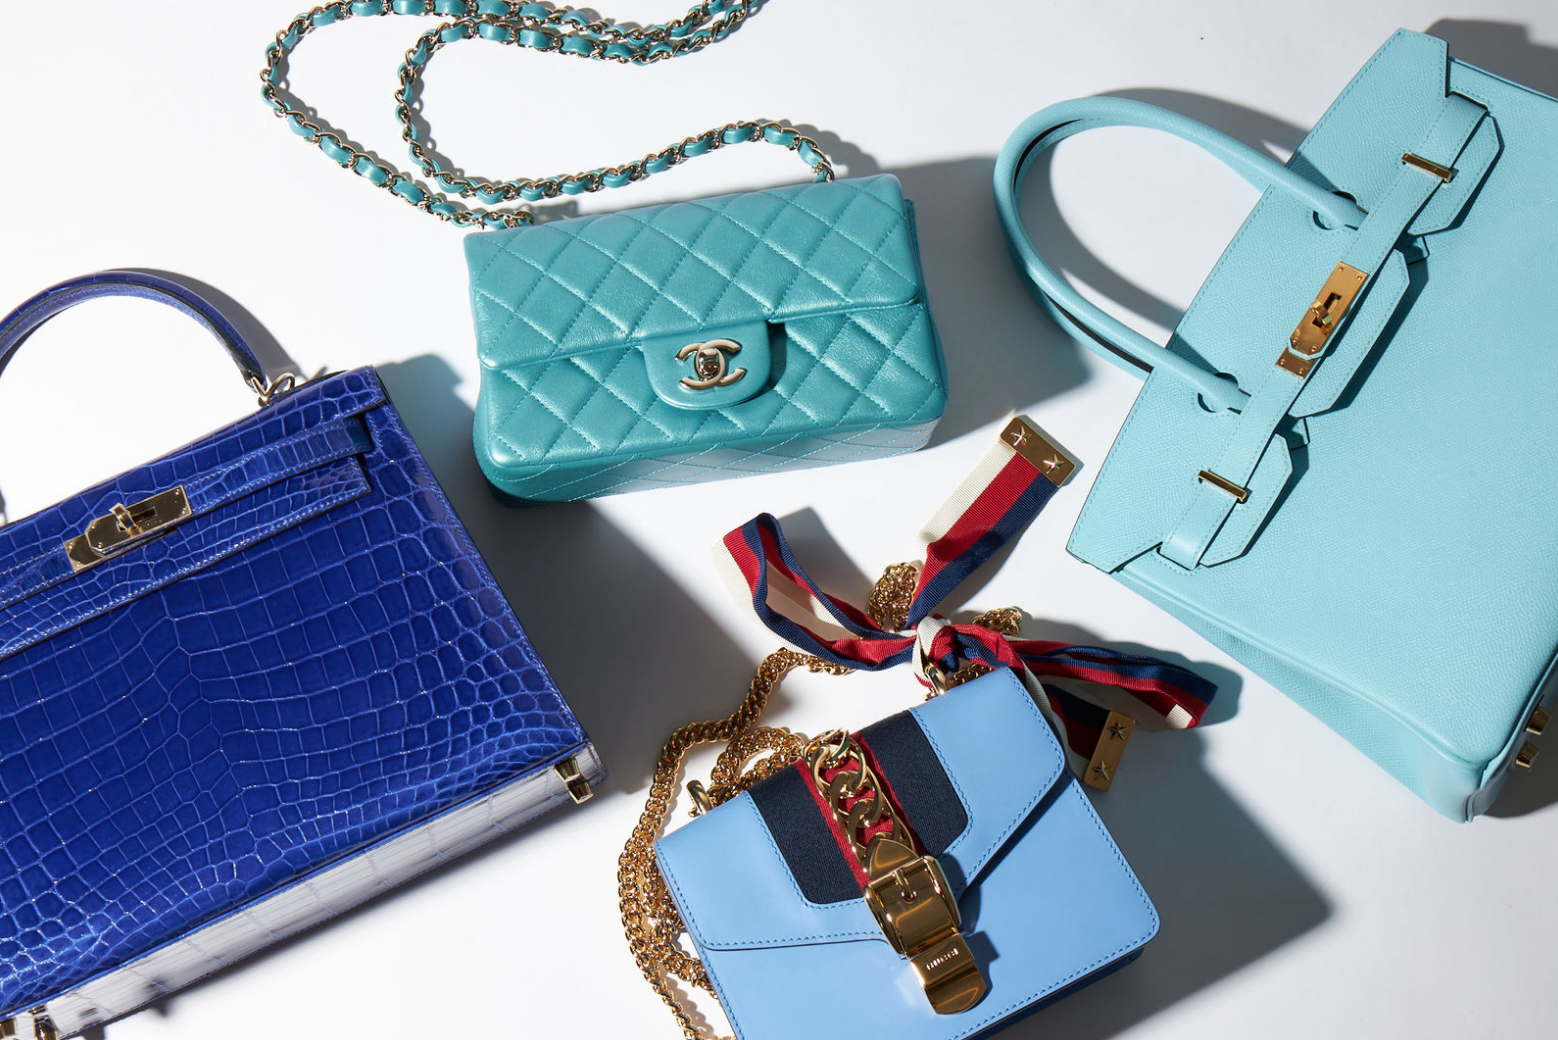 Keeping It Real w/ Luxe Du Jour: Top 3 Risks of Buying Counterfeit